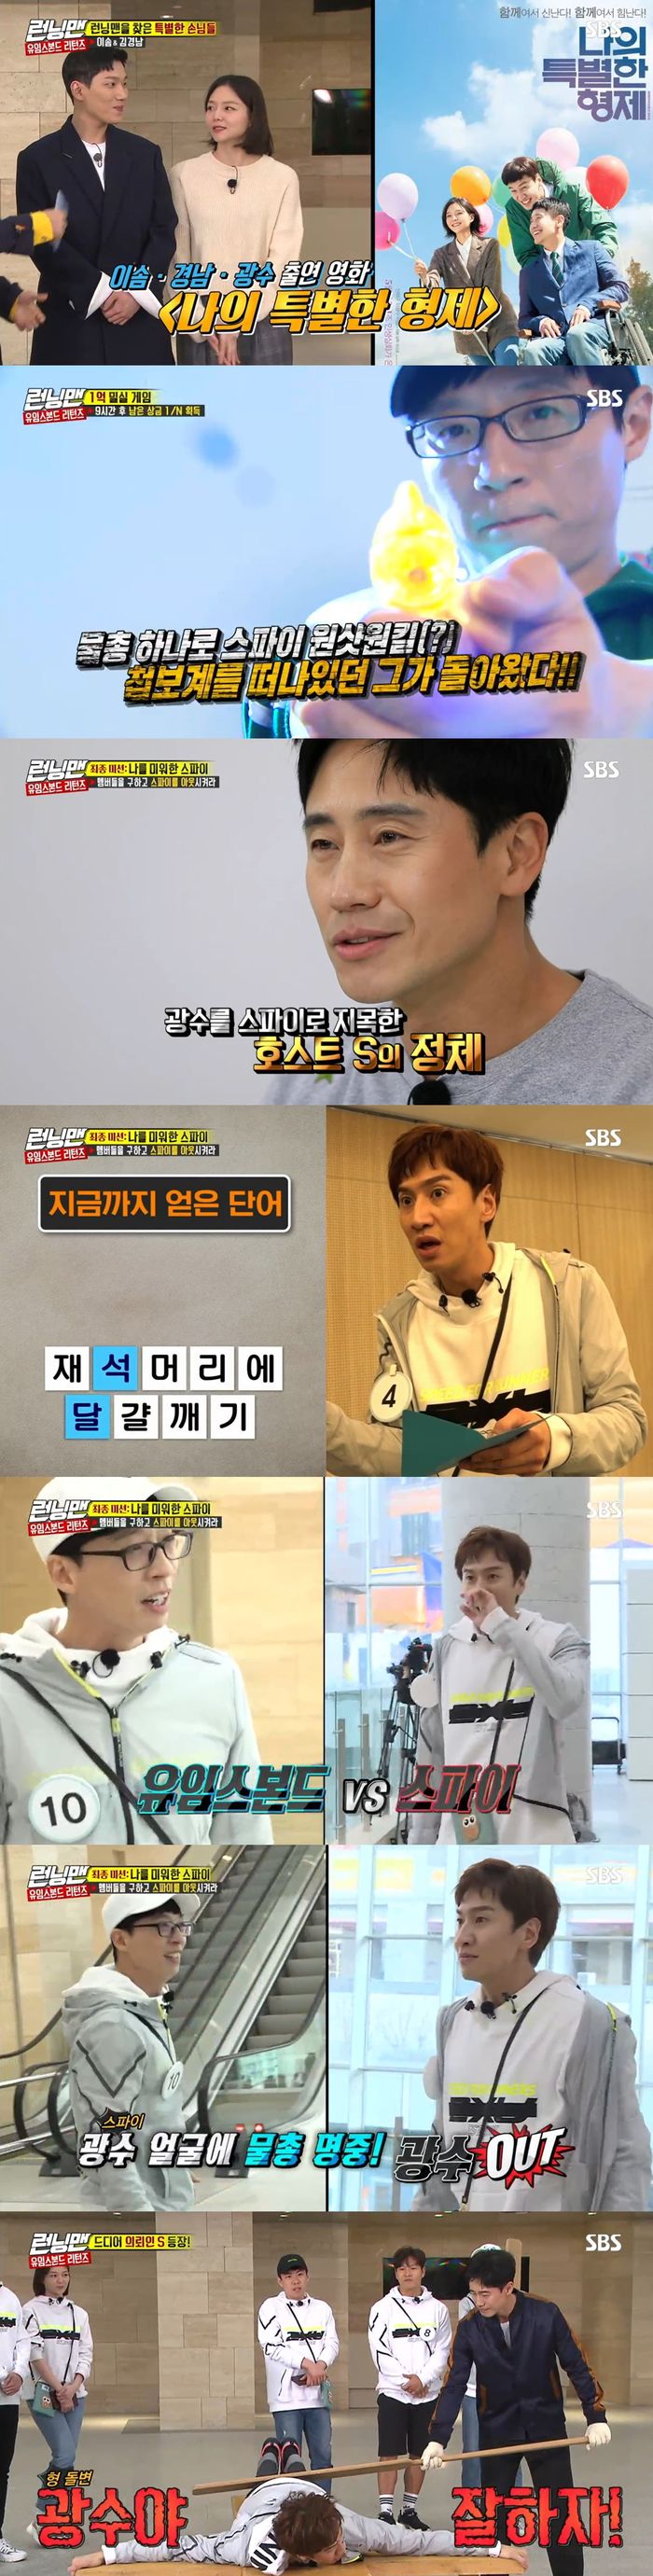 Back in four years, Bond Yoo Jae-Suk and Spy Lee Kwang-soo became the best one minute characters.According to Nielsen Korea, the ratings agency, SBS Running Man, which was broadcast on the 28th, soared to 8.1% of the highest audience rating per minute (based on the audience rating of households in the metropolitan area), and 2049 target audience rating, an important indicator of advertising officials, ranked first in the same time zone with 4.3% (based on two viewer ratings).On this day, Shin Ha-kyun, Esom, and Kim Kyung-nam, the main characters of the movie My Special Brother, were together in Running Man.Members who received the invitation from the unidentified host S started My Special Money Race, which cost 100 million won in prize money.My Special Money Race is a game where members can share the remaining prize money by one-ninth as they have saved the prize money for 9 hours.When the break time came, the members who confirmed the reduced prize money expressed their anger by blaming each other.At this time Esom secretly handed a note to Yoo Jae-Suks hand, and in the note, Youre Yumes Bond; theres Spy whos after you.We need to find Spy and remove it. Im Bond Girl. The resurrection of Uyms in four years.After nine hours of solitary confinement, the members started a race to find the safe with their name attached and then to the host S safe to obtain the amount collected.Bond Yoo Jae-Suk and Bond Girl Esom were given secret orders.When the private safe is opened, the members are infected by the money reader. Within 10 minutes, Bond should shoot the water gun on the name tag to treat Infection.If even one person is infected into the Dondog and out or Spy removes the Uyms Bond, the race ends.Yang Se-chan, Lee Kwang-soo, Haha, Ji Seok-jin and Song Ji-hyo opened the vault and were treated by Yumes Bond and isolated into the treatment room.A questionable quail egg was found inside the members hats in the intensive care unit and Spy was identified as Lee Kwang-soo.The identity of host S, who identified Lee Kwang-soo as Spy, was Shin Ha-kyun.Lee Kwang-soo left the treatment room and secretly put quail eggs in the members to get clues to remove Yumes Bond.Lee Kwang-soo, who got the hint of breaking eggs in the head of the stone, immediately started to remove the bond.Finally, Bond Yoo Jae-Suk and Spy Lee Kwang-soo were in a hurry.After a tense confrontation, Lee Kwang-soo ended with a final victory over Yumes Bond, who hit the water gun on his face.The scene had the highest audience rating of 8.1% per minute, accounting for the best one minute.Host S Shin Ha-kyun, who appeared after the race ended, presented the honorary pure gold card to Uyms Bond Yoo Jae-Suk and Bond Girl Esom.Lee Kwang-soo, who failed the Spy mission on the other hand, was hit by Shin Ha-kyun for a penalty.